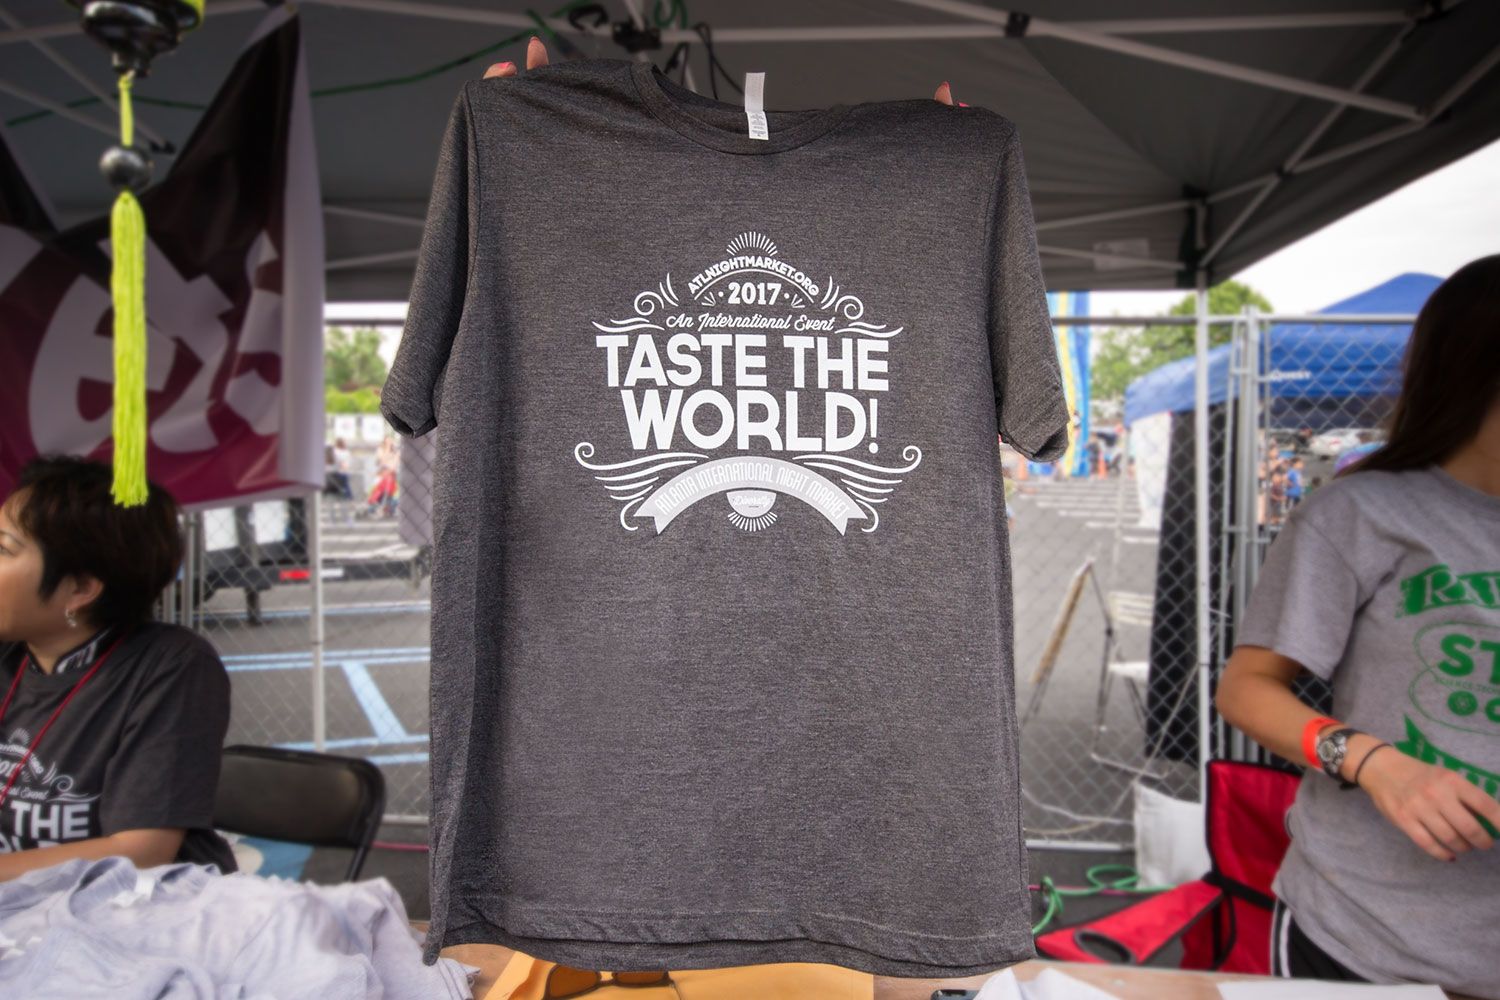 The Taste The World t-shirt printed for the event.